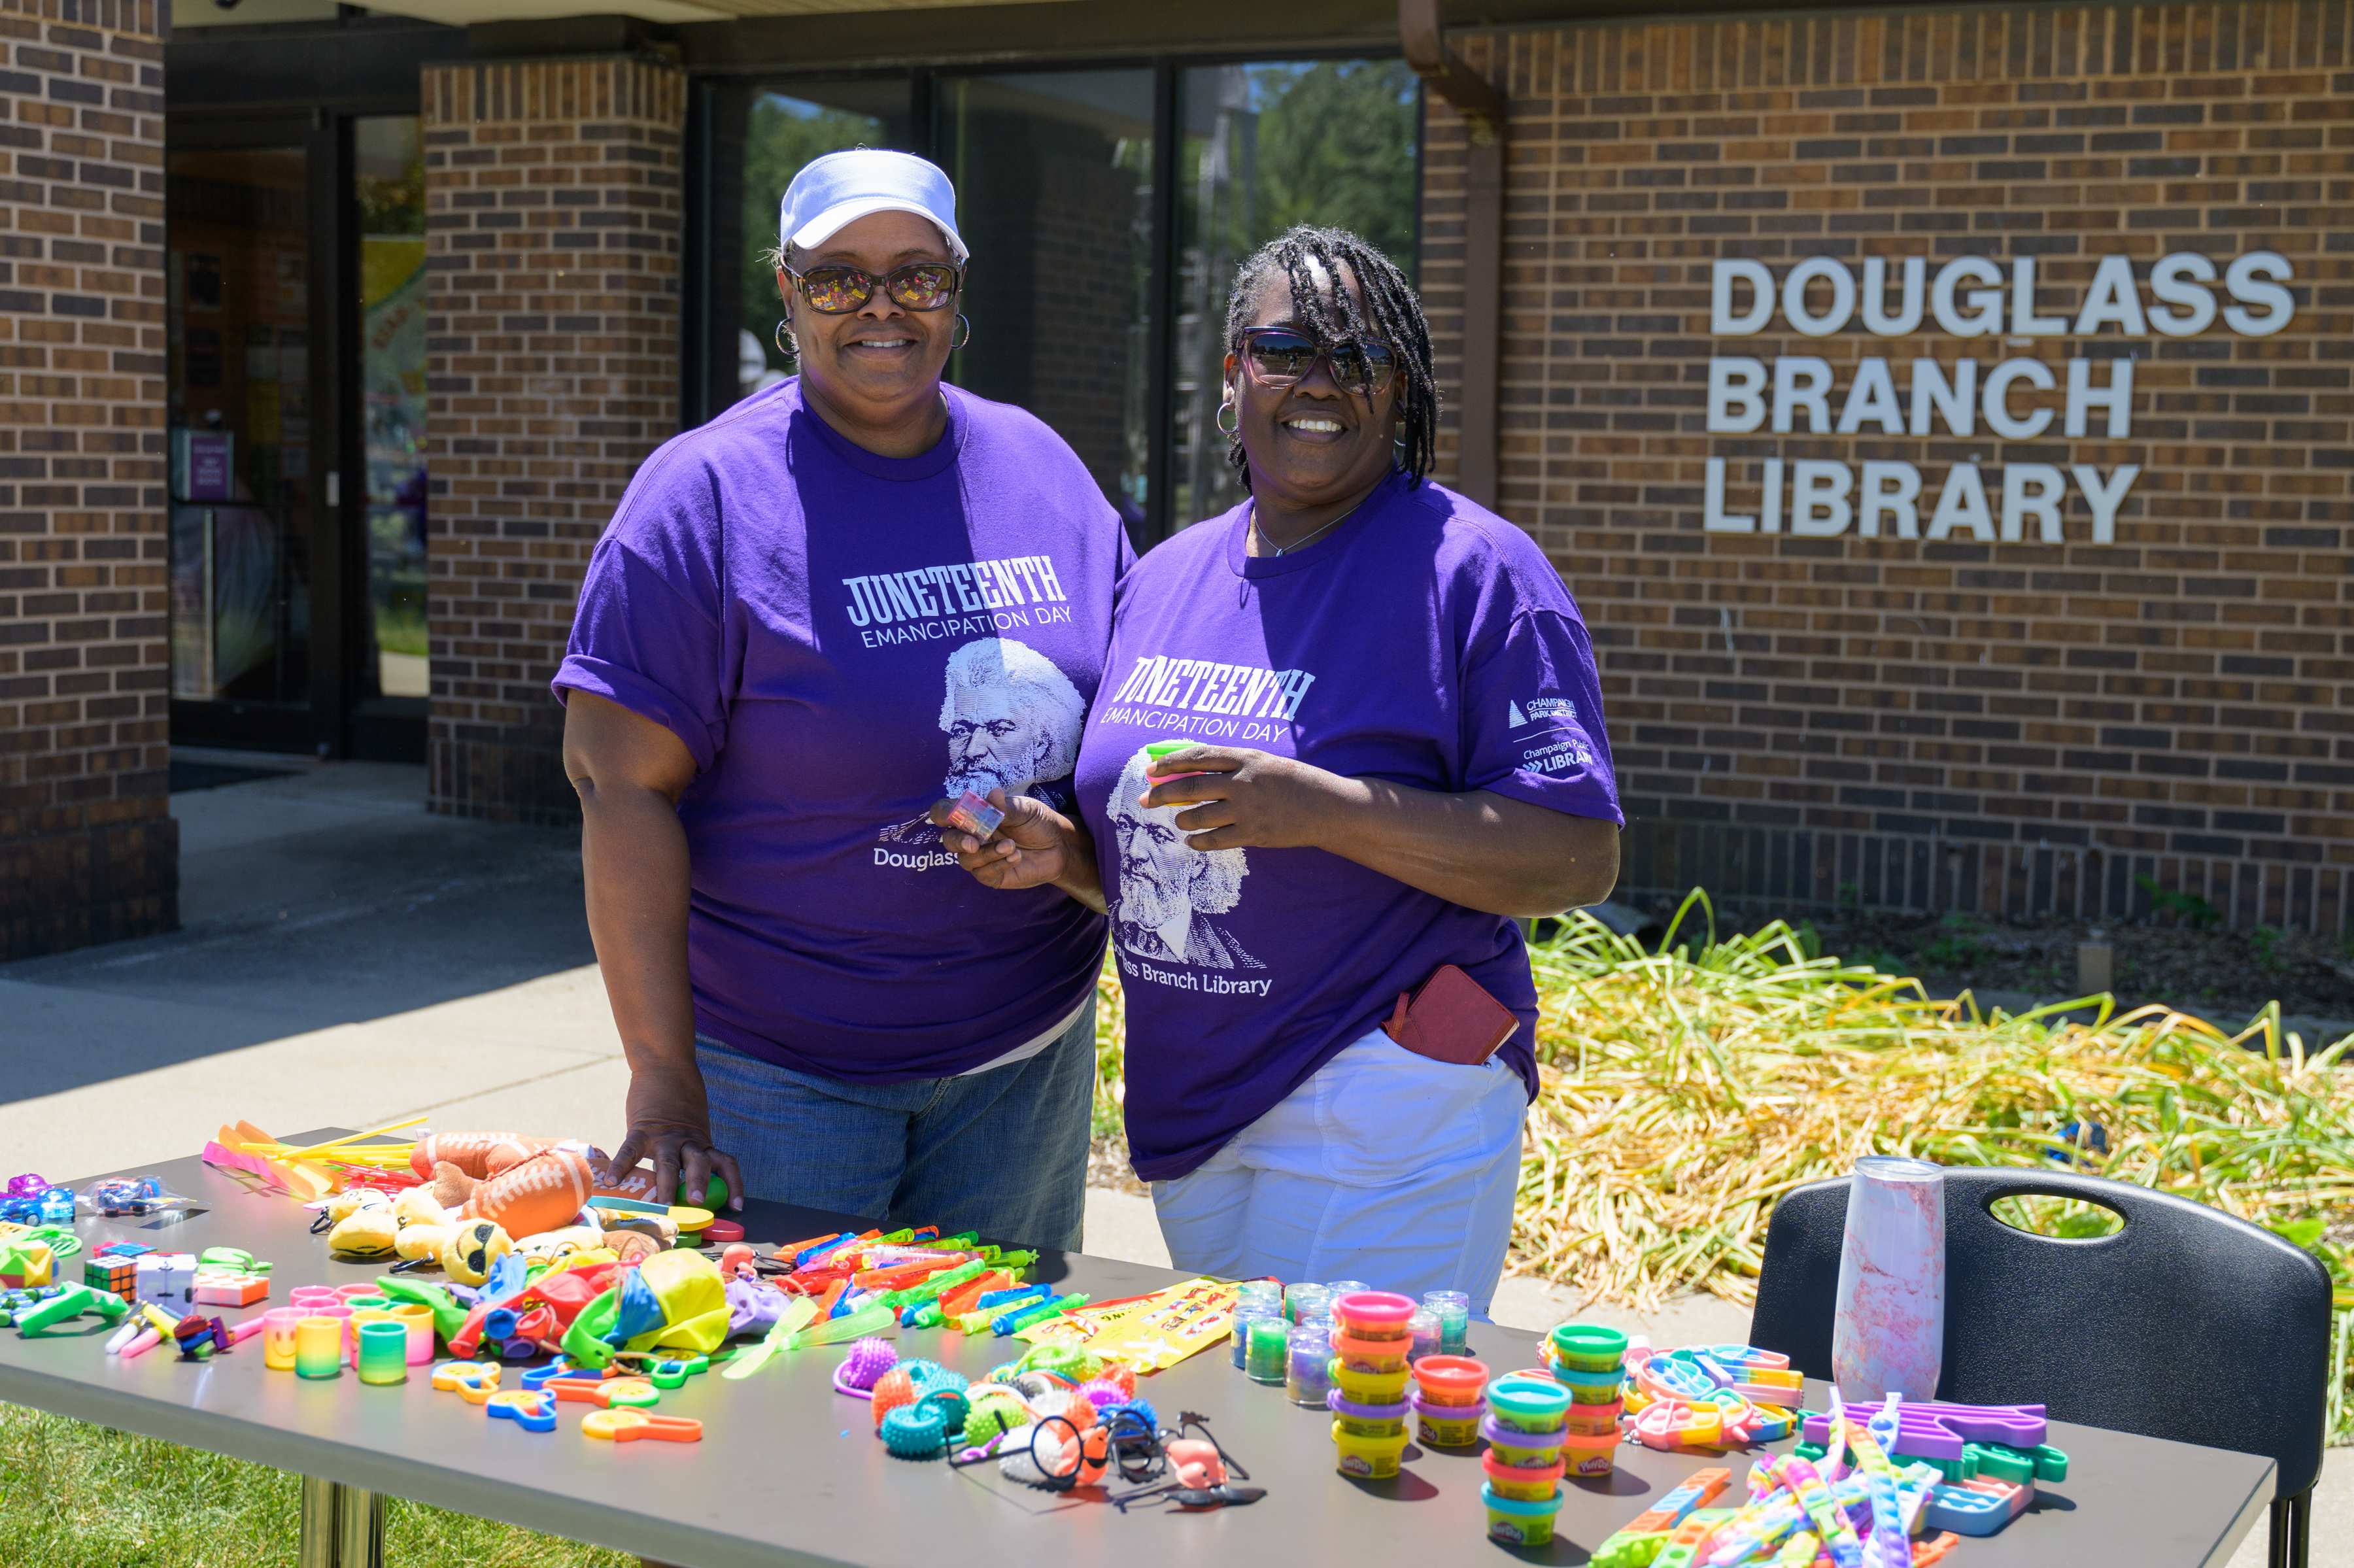 2 volunteers smiling, prize table, in front of Douglass Branch Library